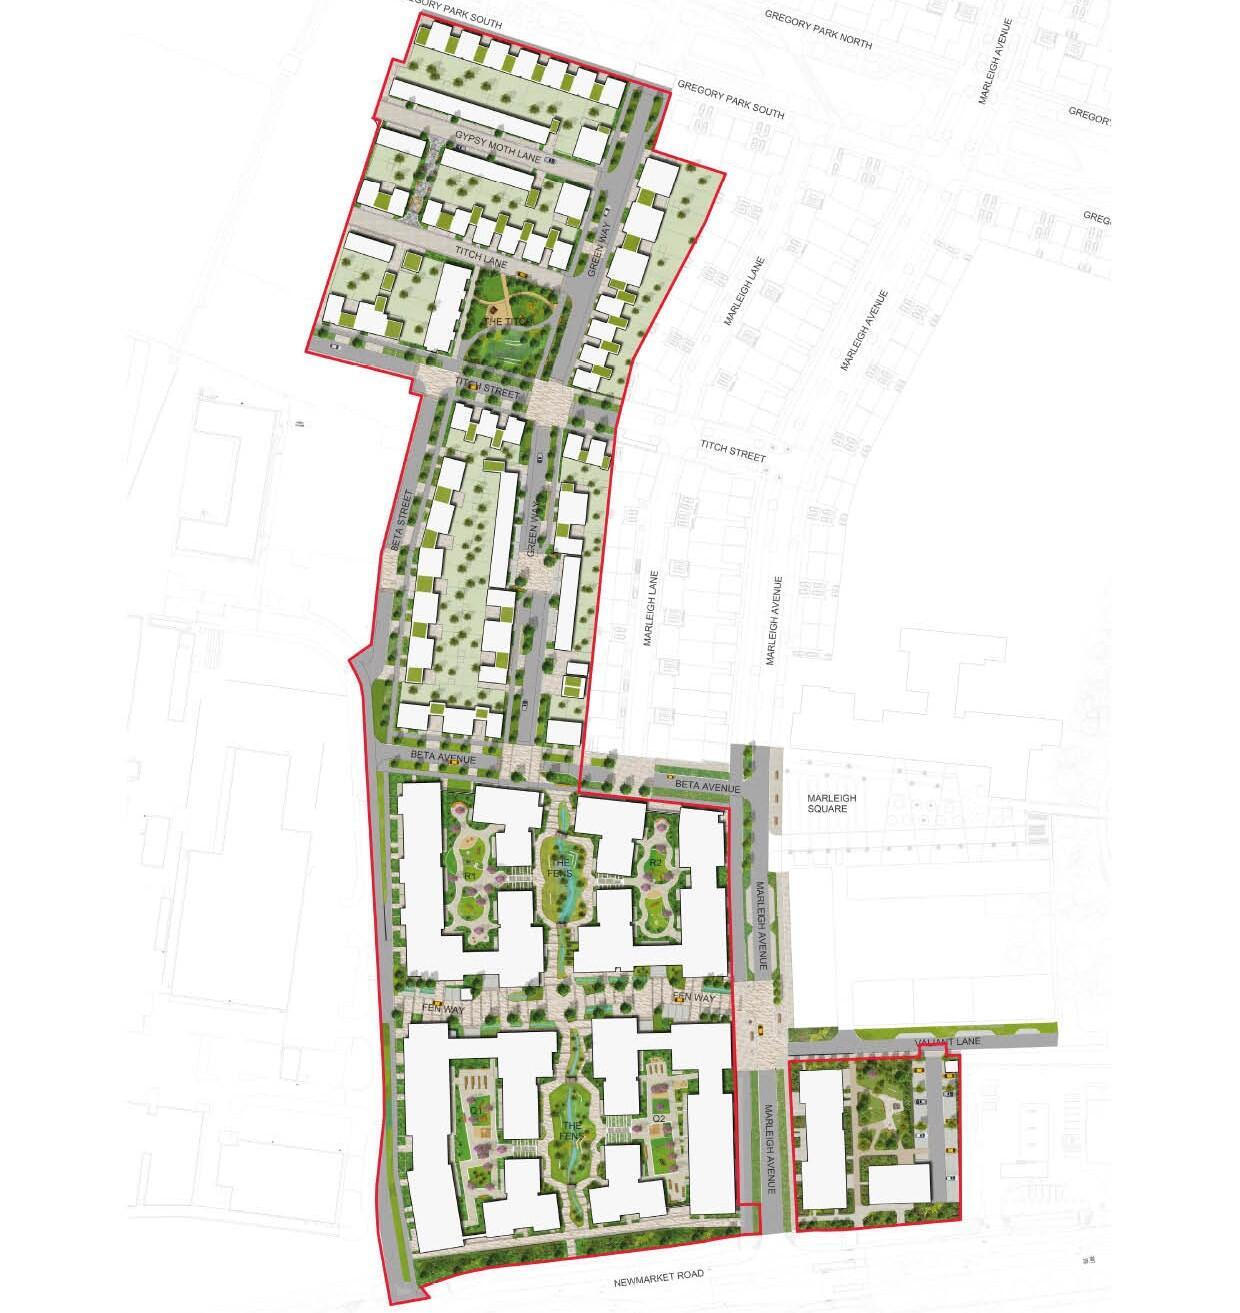 An illustrative masterplan of the Marleigh Phase 2 development. © BMD